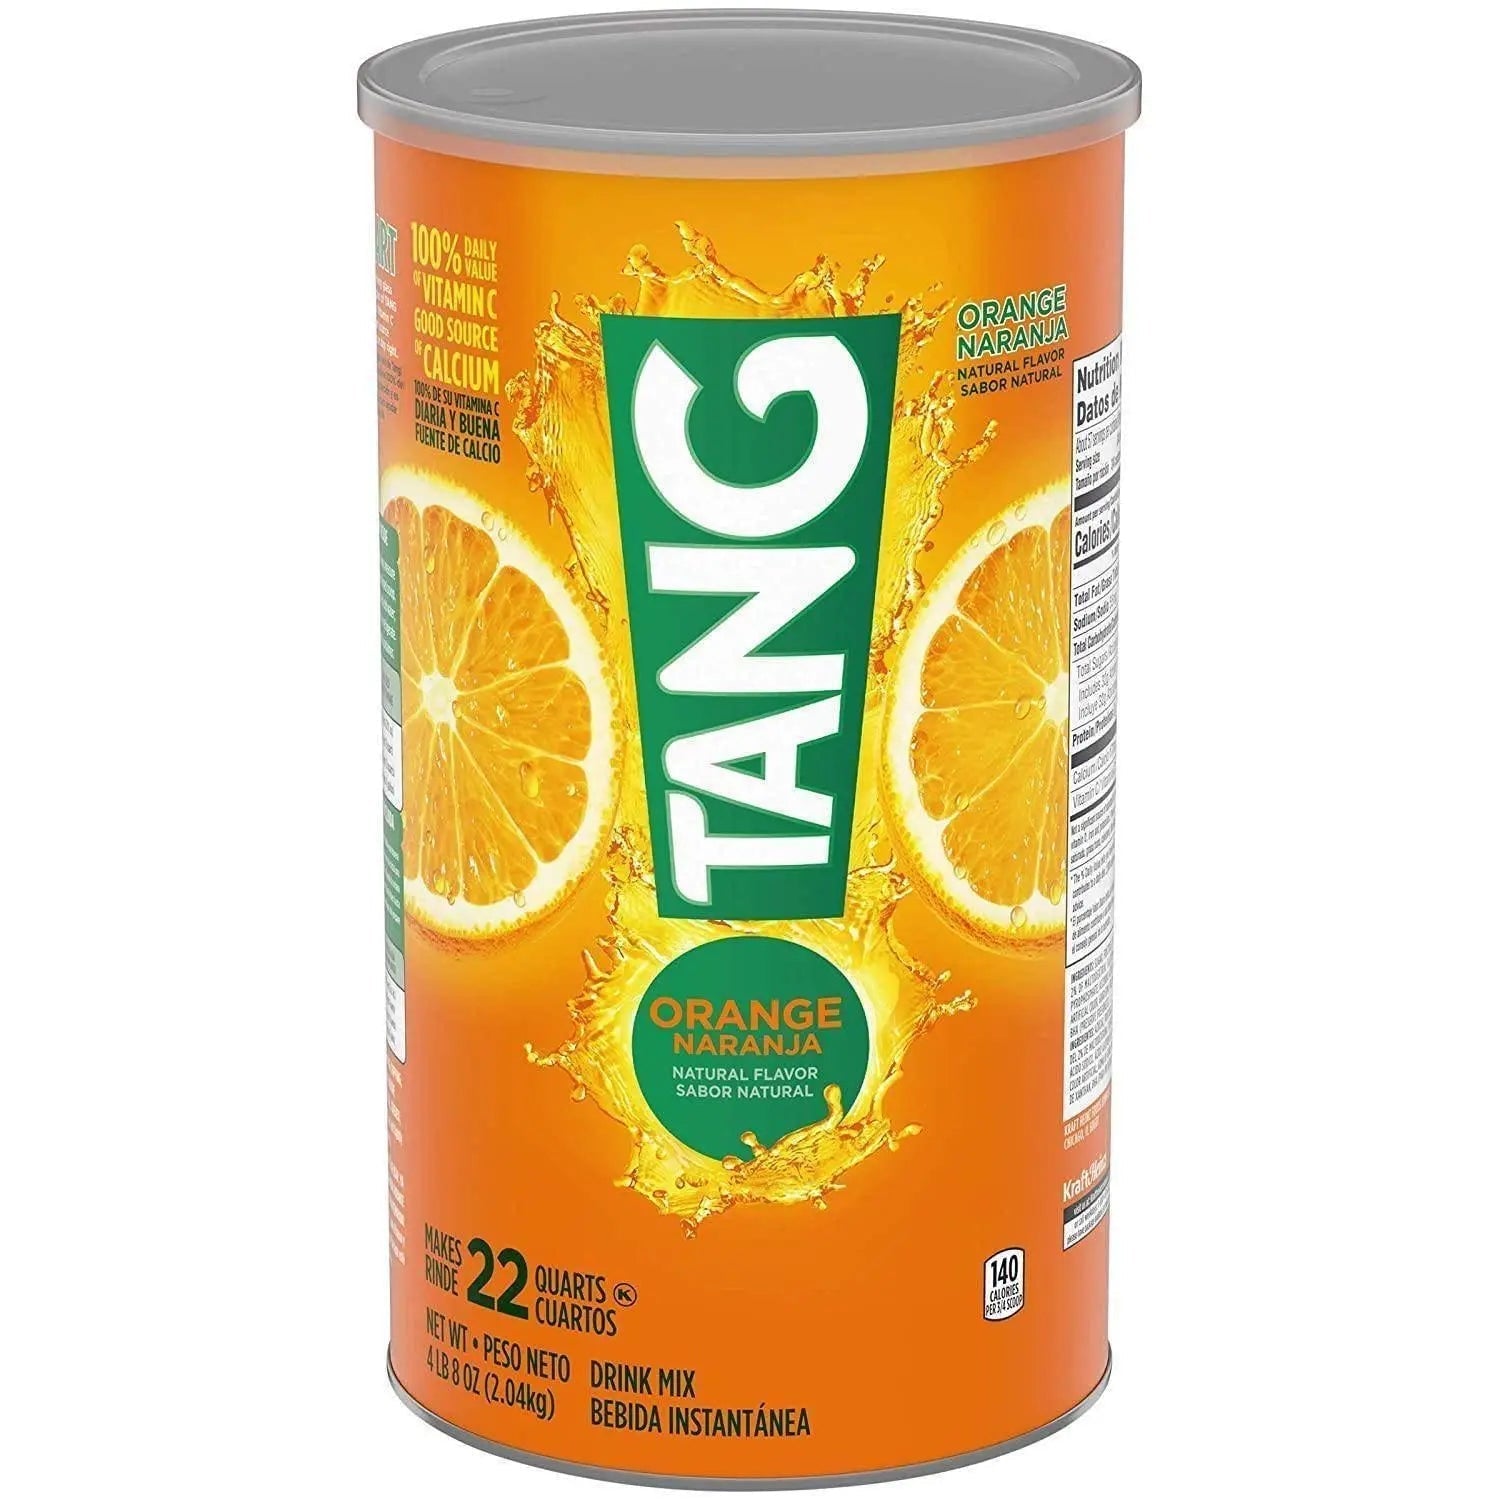 Wholesale prices with free shipping all over United States Tang Drink Powder, Orange (Pack of 2) - Steven Deals